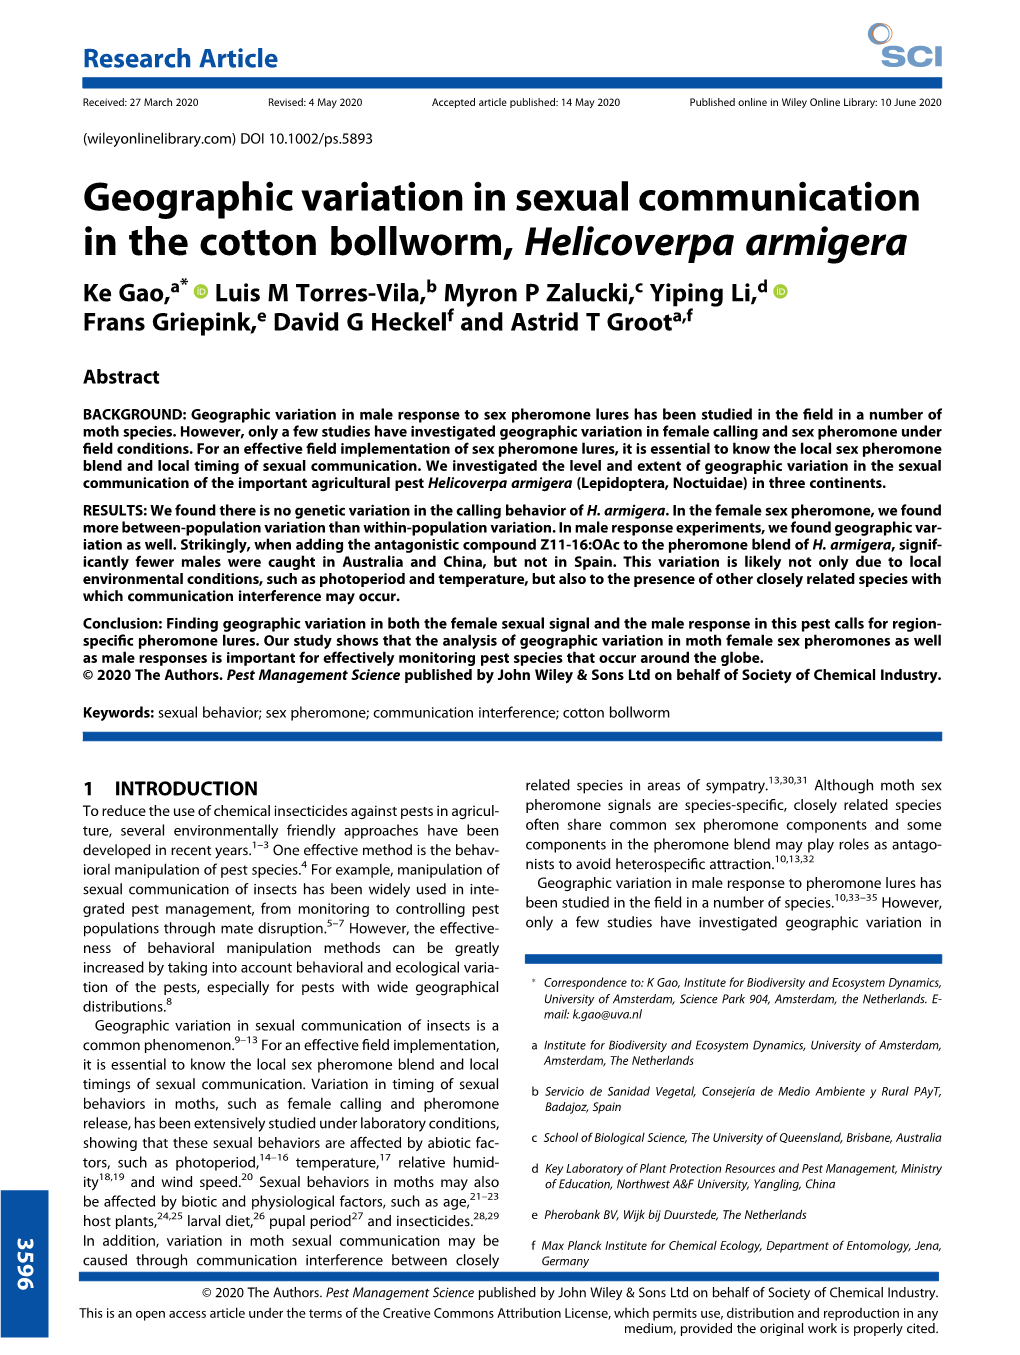 Geographic Variation in Sexual Communication in the Cotton